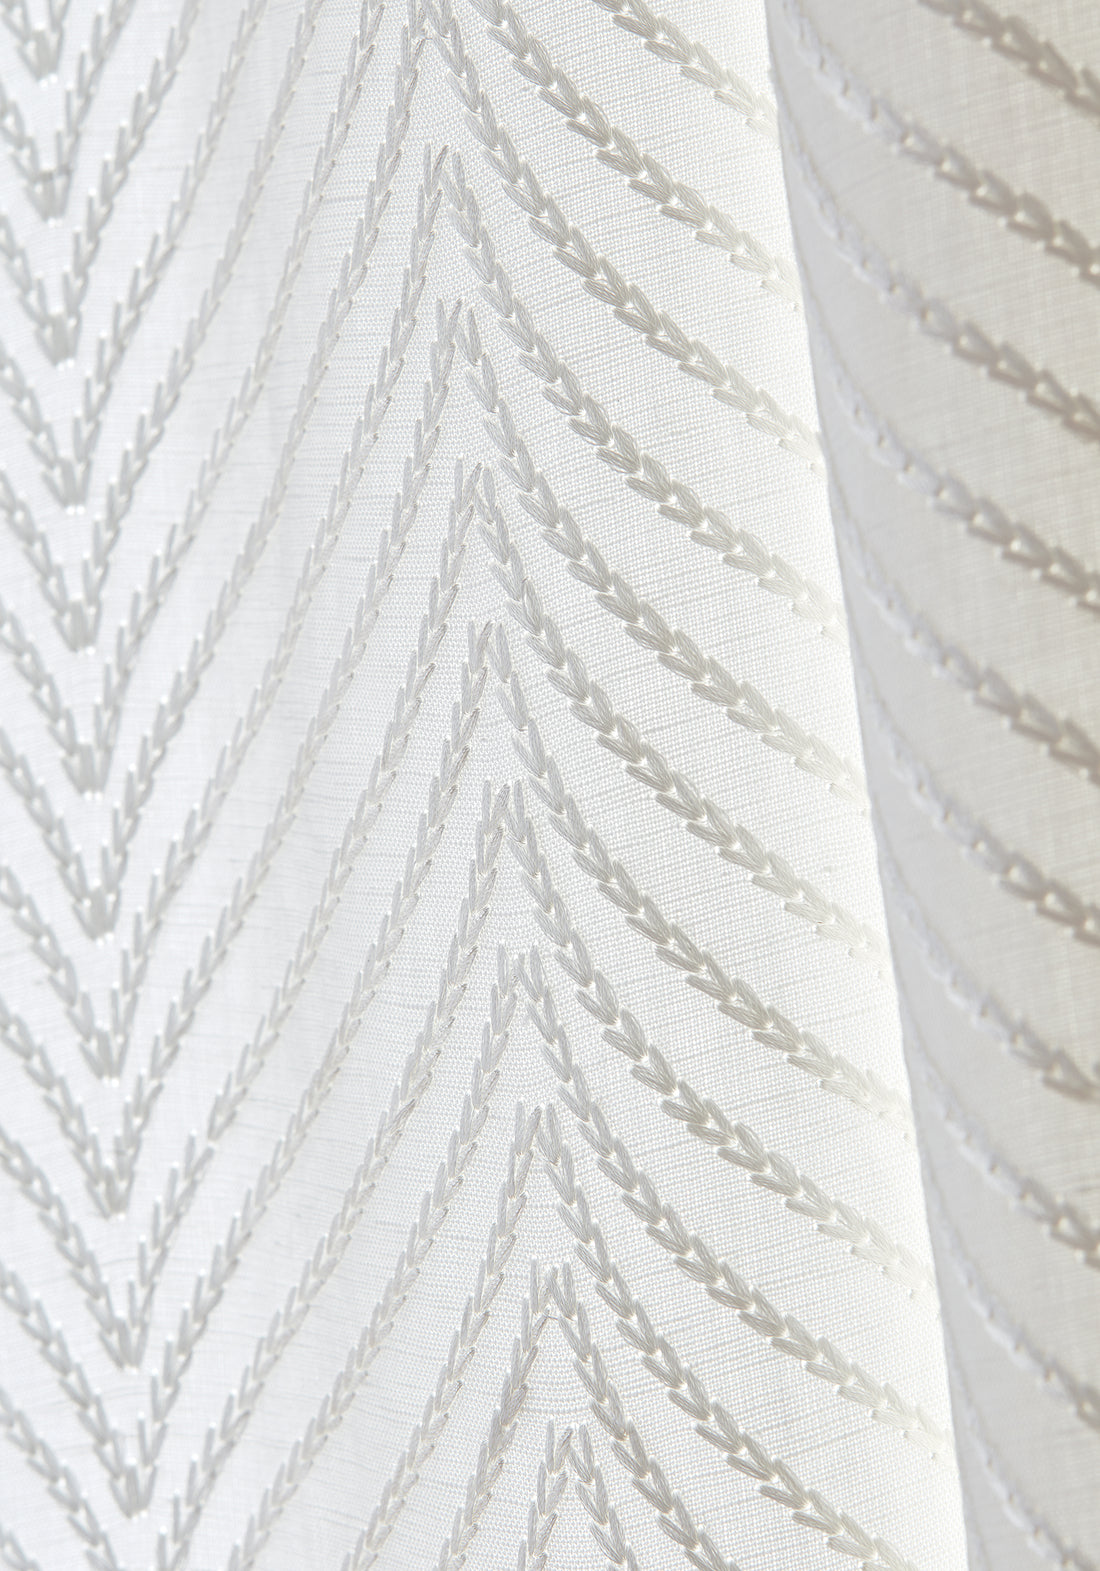 Detailed view of Drapery in Clayton Herringbone woven fabric in ivory color variant by Thibaut in the Dynasty collection - pattern number W775444